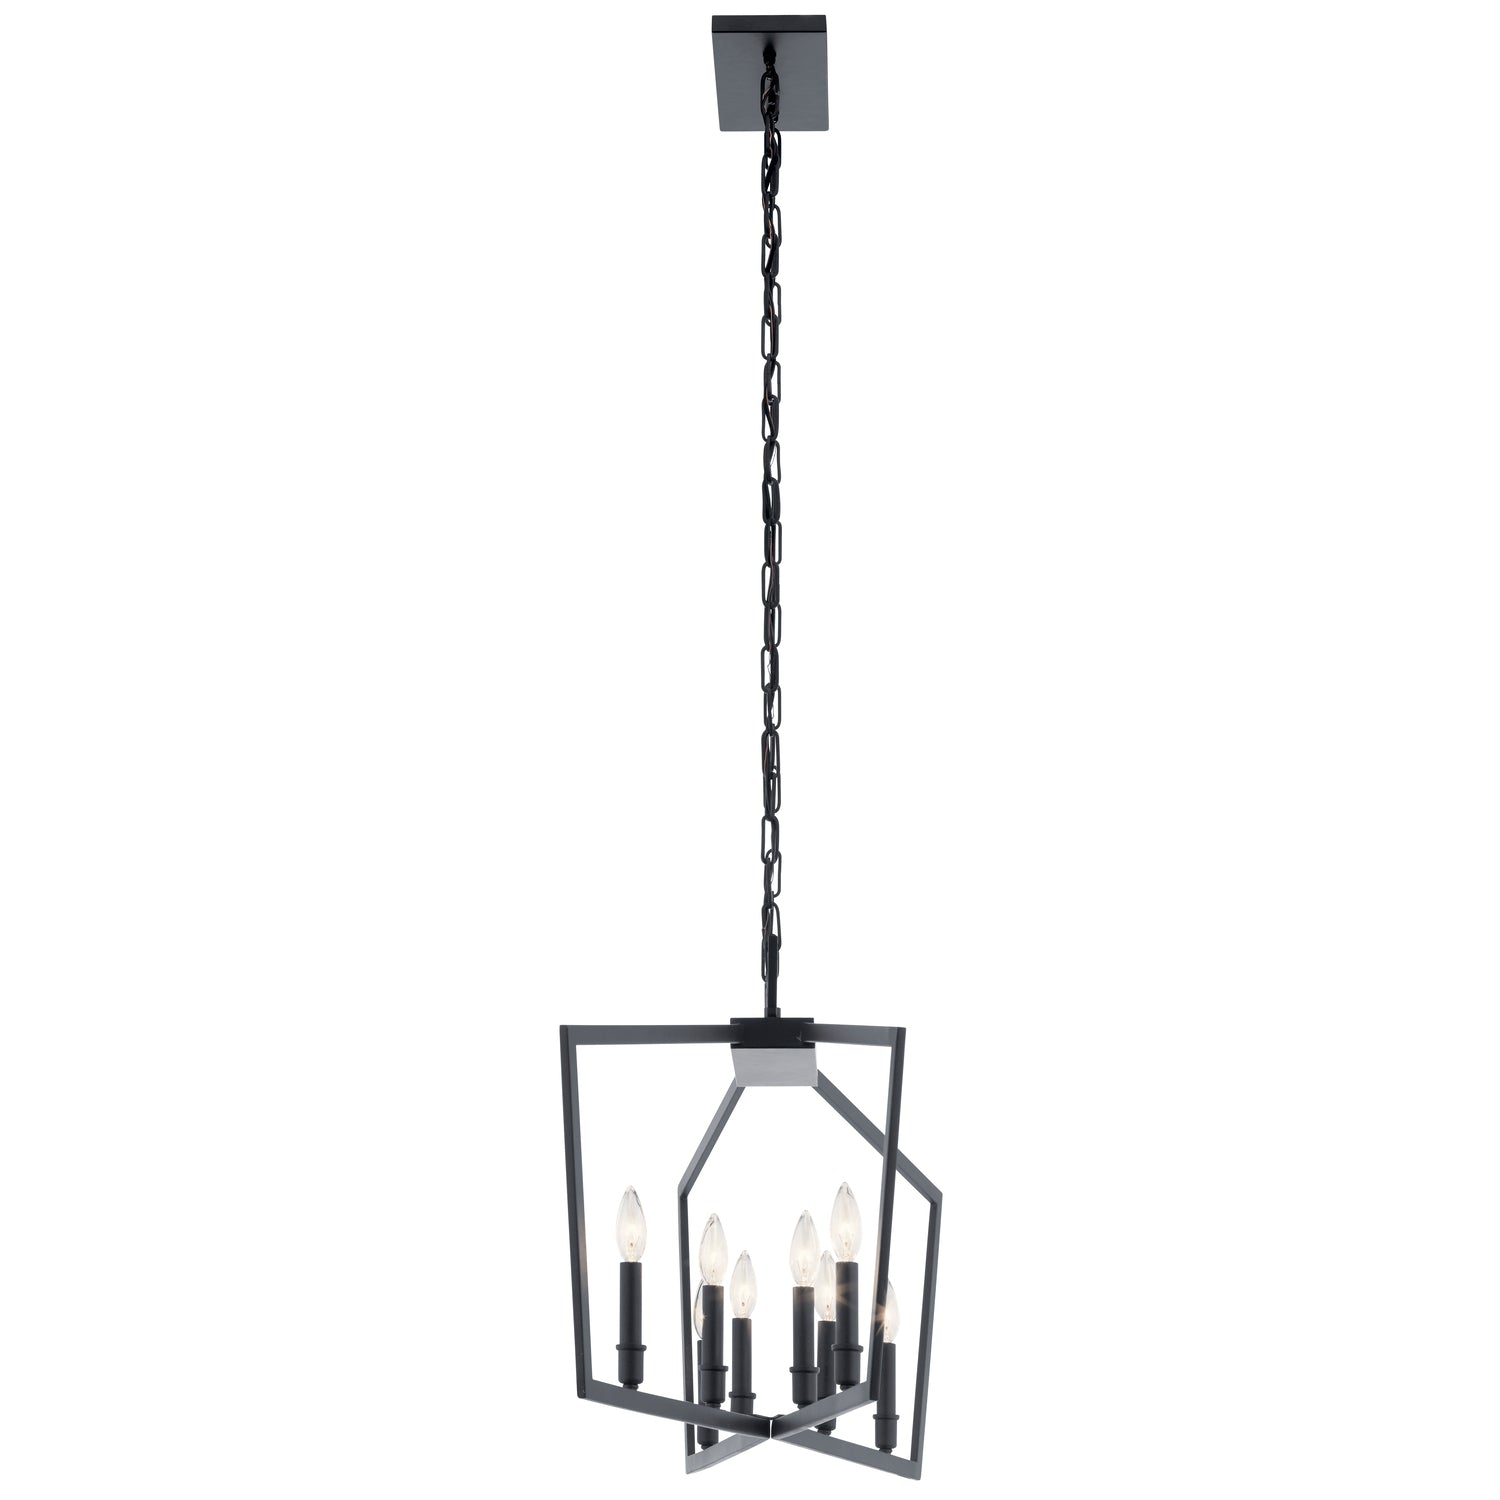 Abbotswell Linear Suspension Black